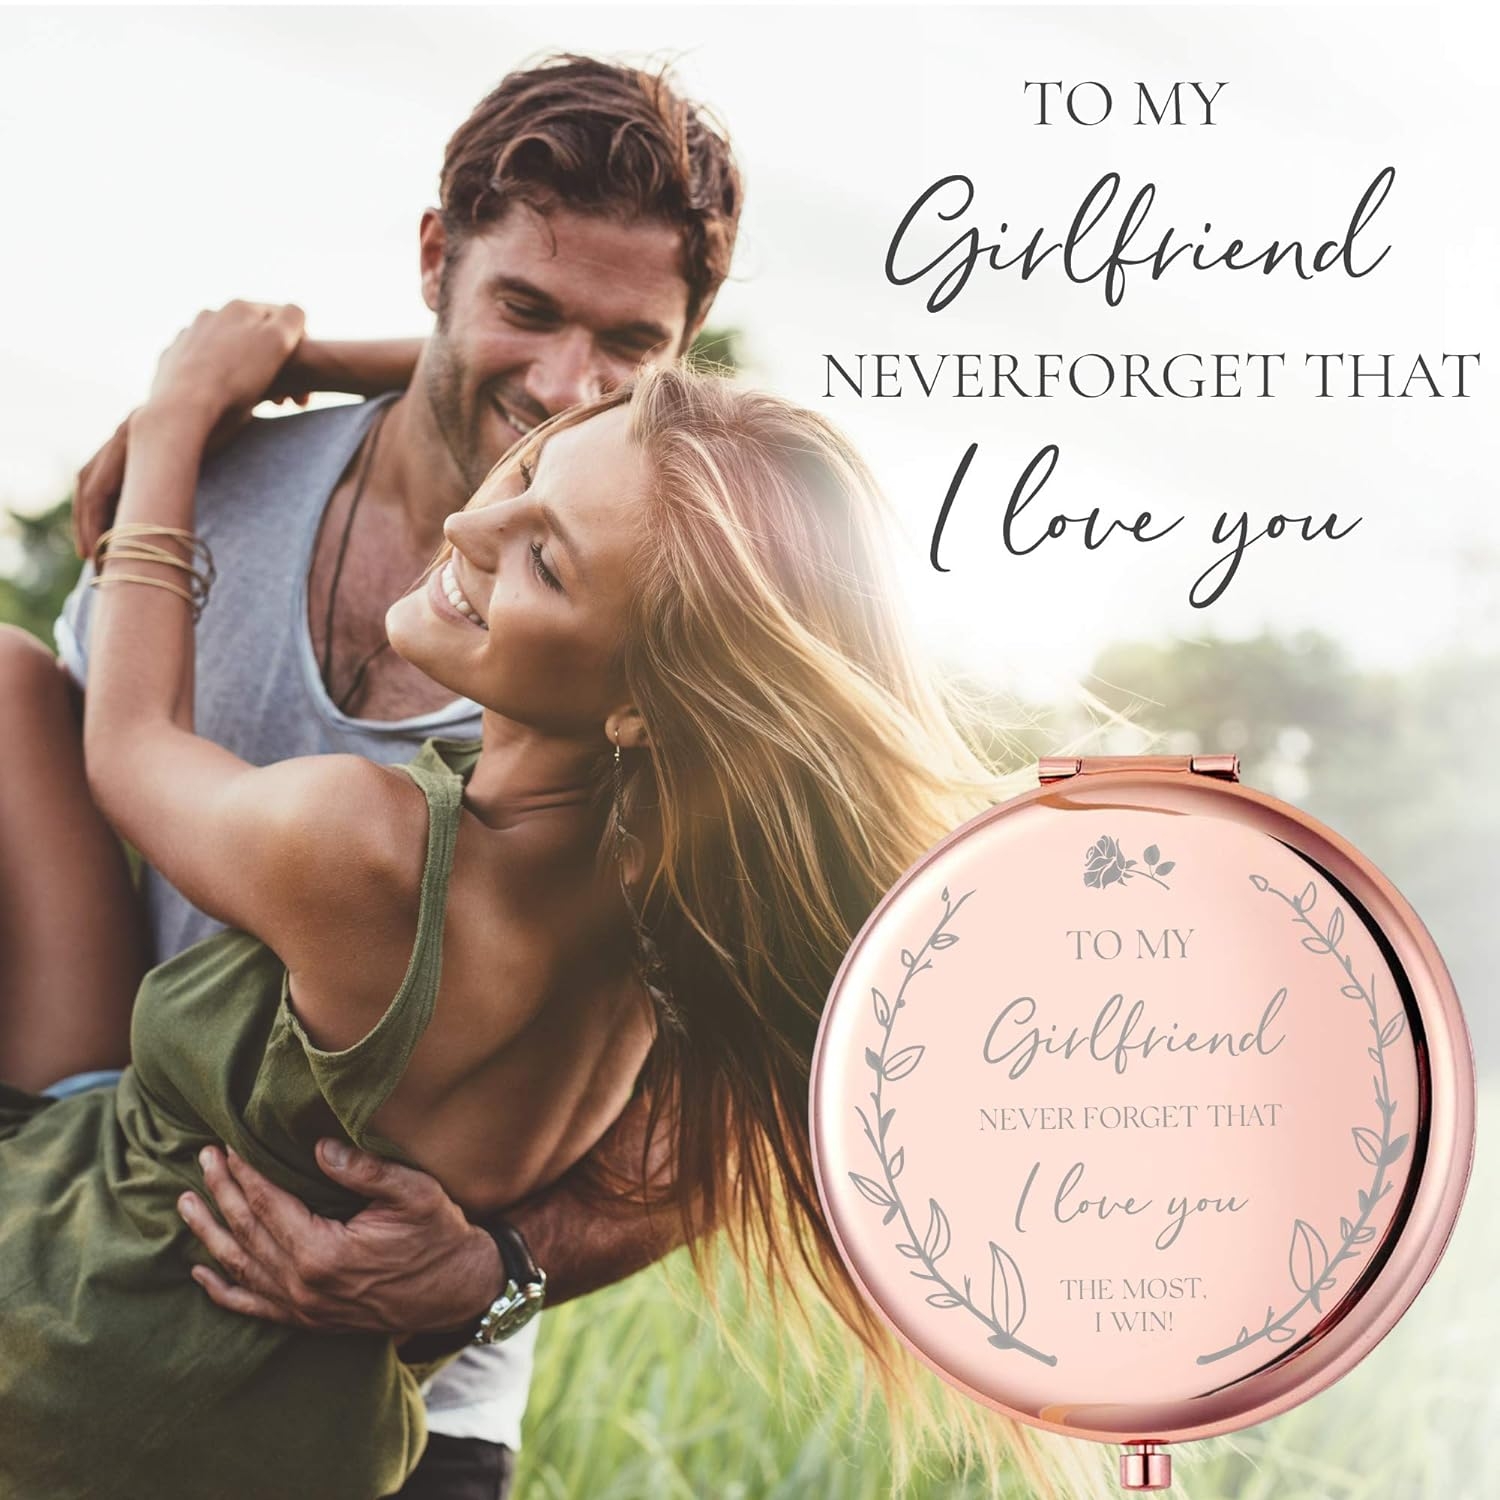 Cute Birthday Gifts for Girlfriend I 'to My Girlfriend' Compact Mirror I Cute Girlfriend Gifts to say I Love You I Girlfriend Gift Ideas I One Year Anniversary Gi fts for Girlfriend